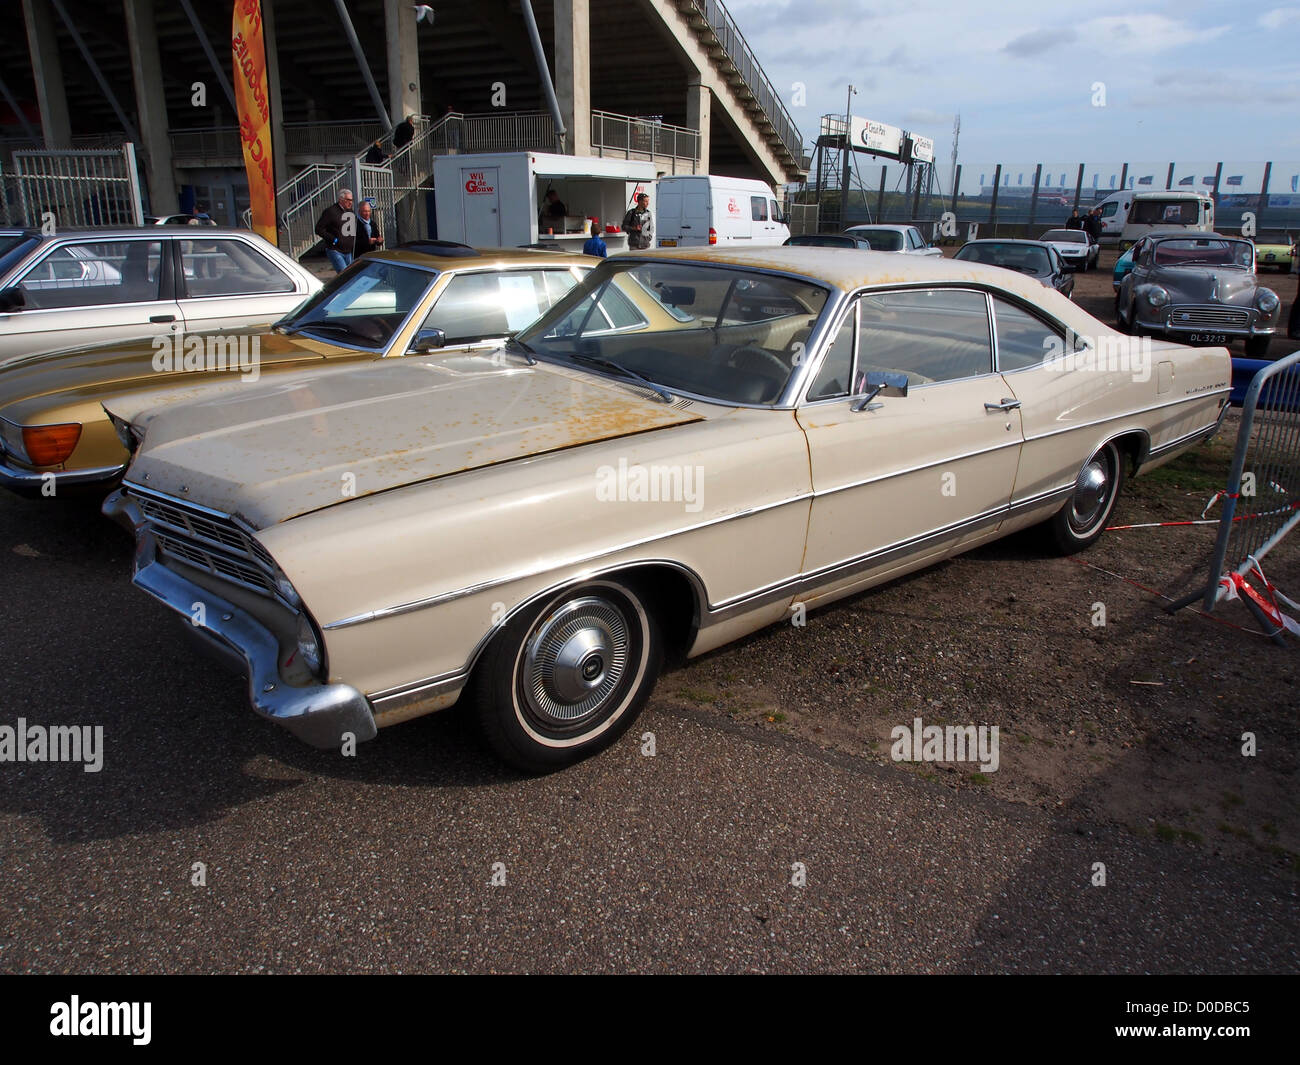 1967 Ford Galaxie 500 Stock Photo